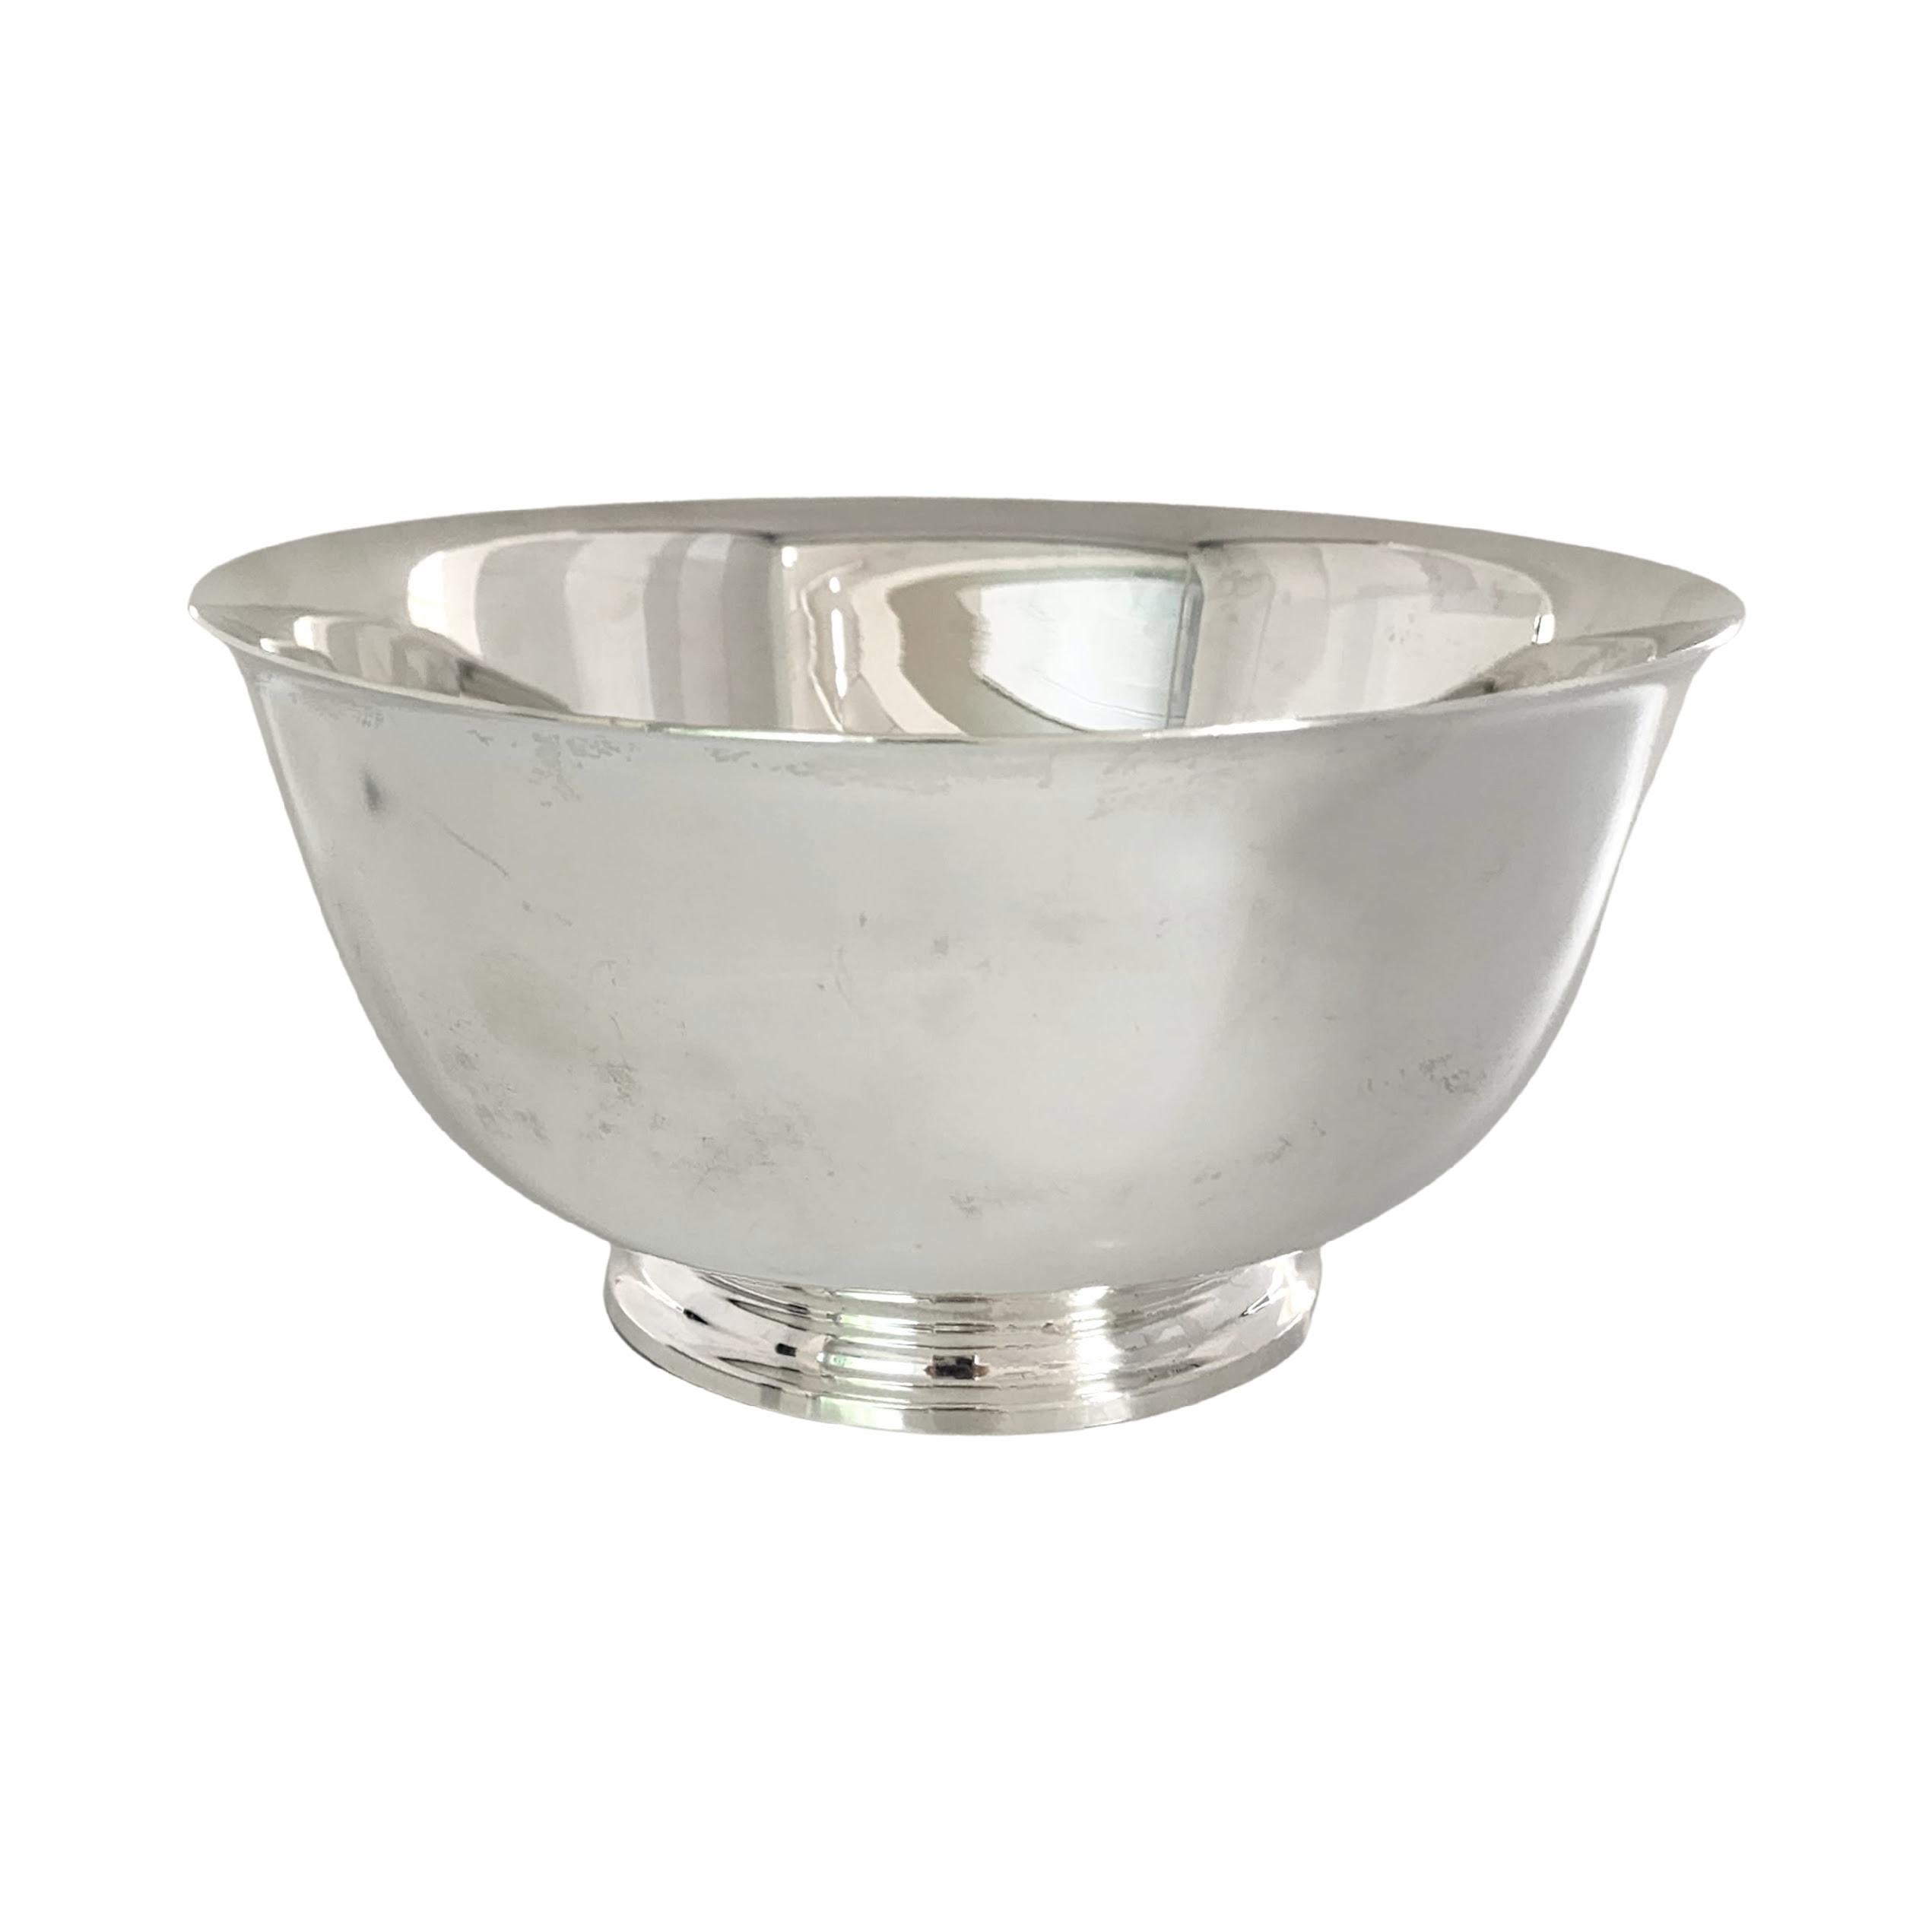 Tiffany & Co Sterling Silver 23618 Paul Revere Footed Bowl with Box 5